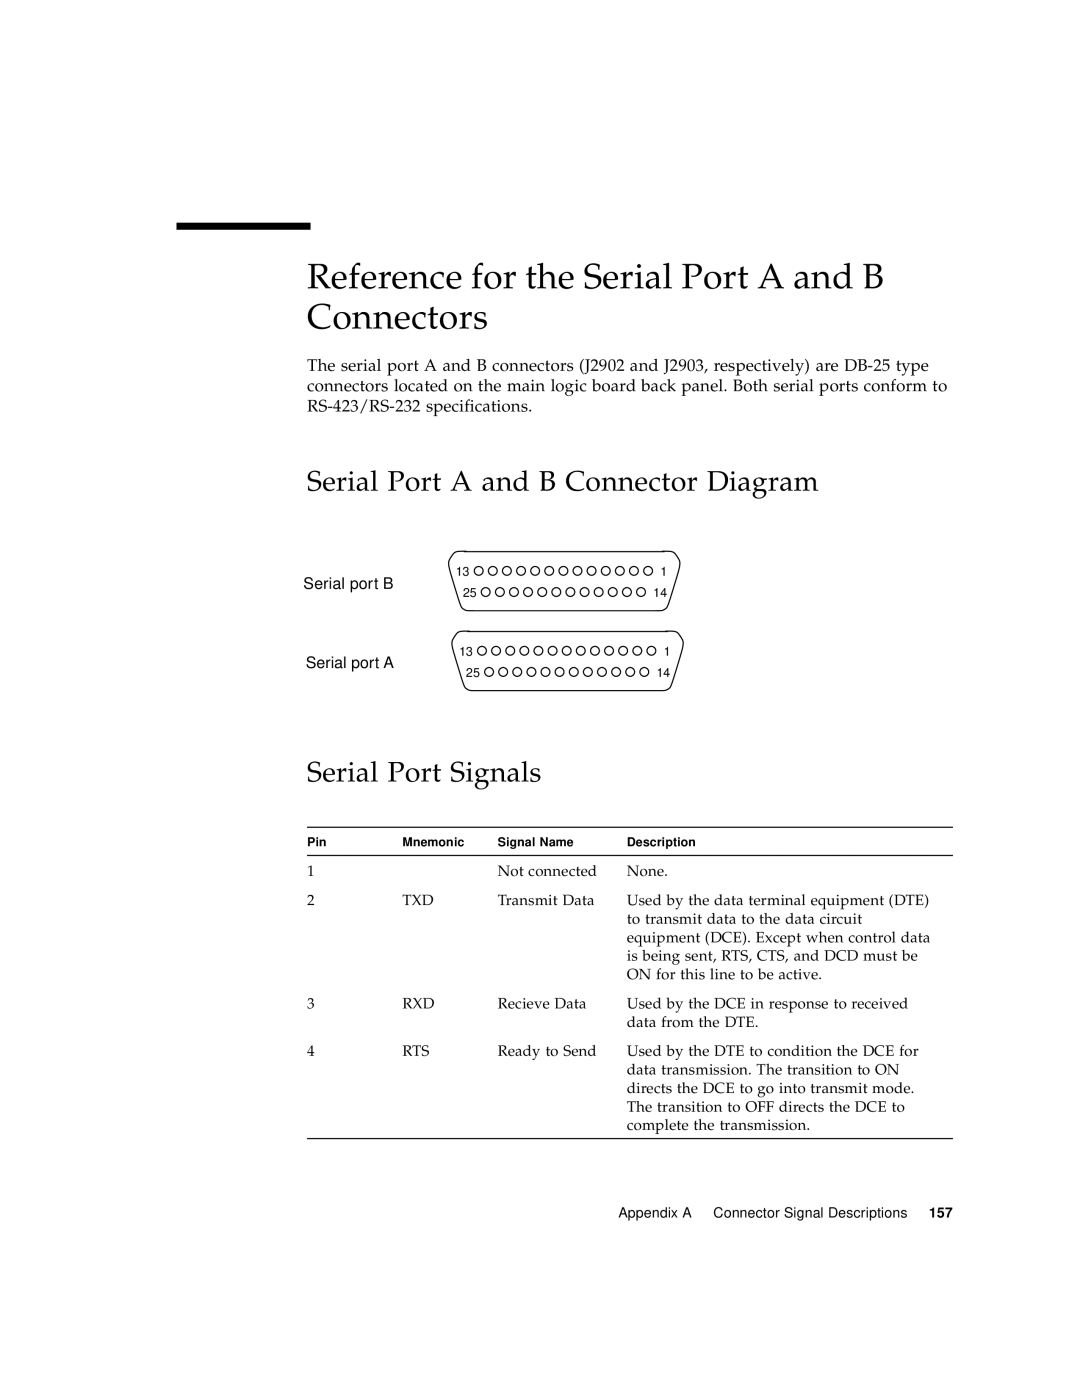 Sun Microsystems 220R manual Reference for the Serial Port A and B Connectors, Serial Port A and B Connector Diagram 